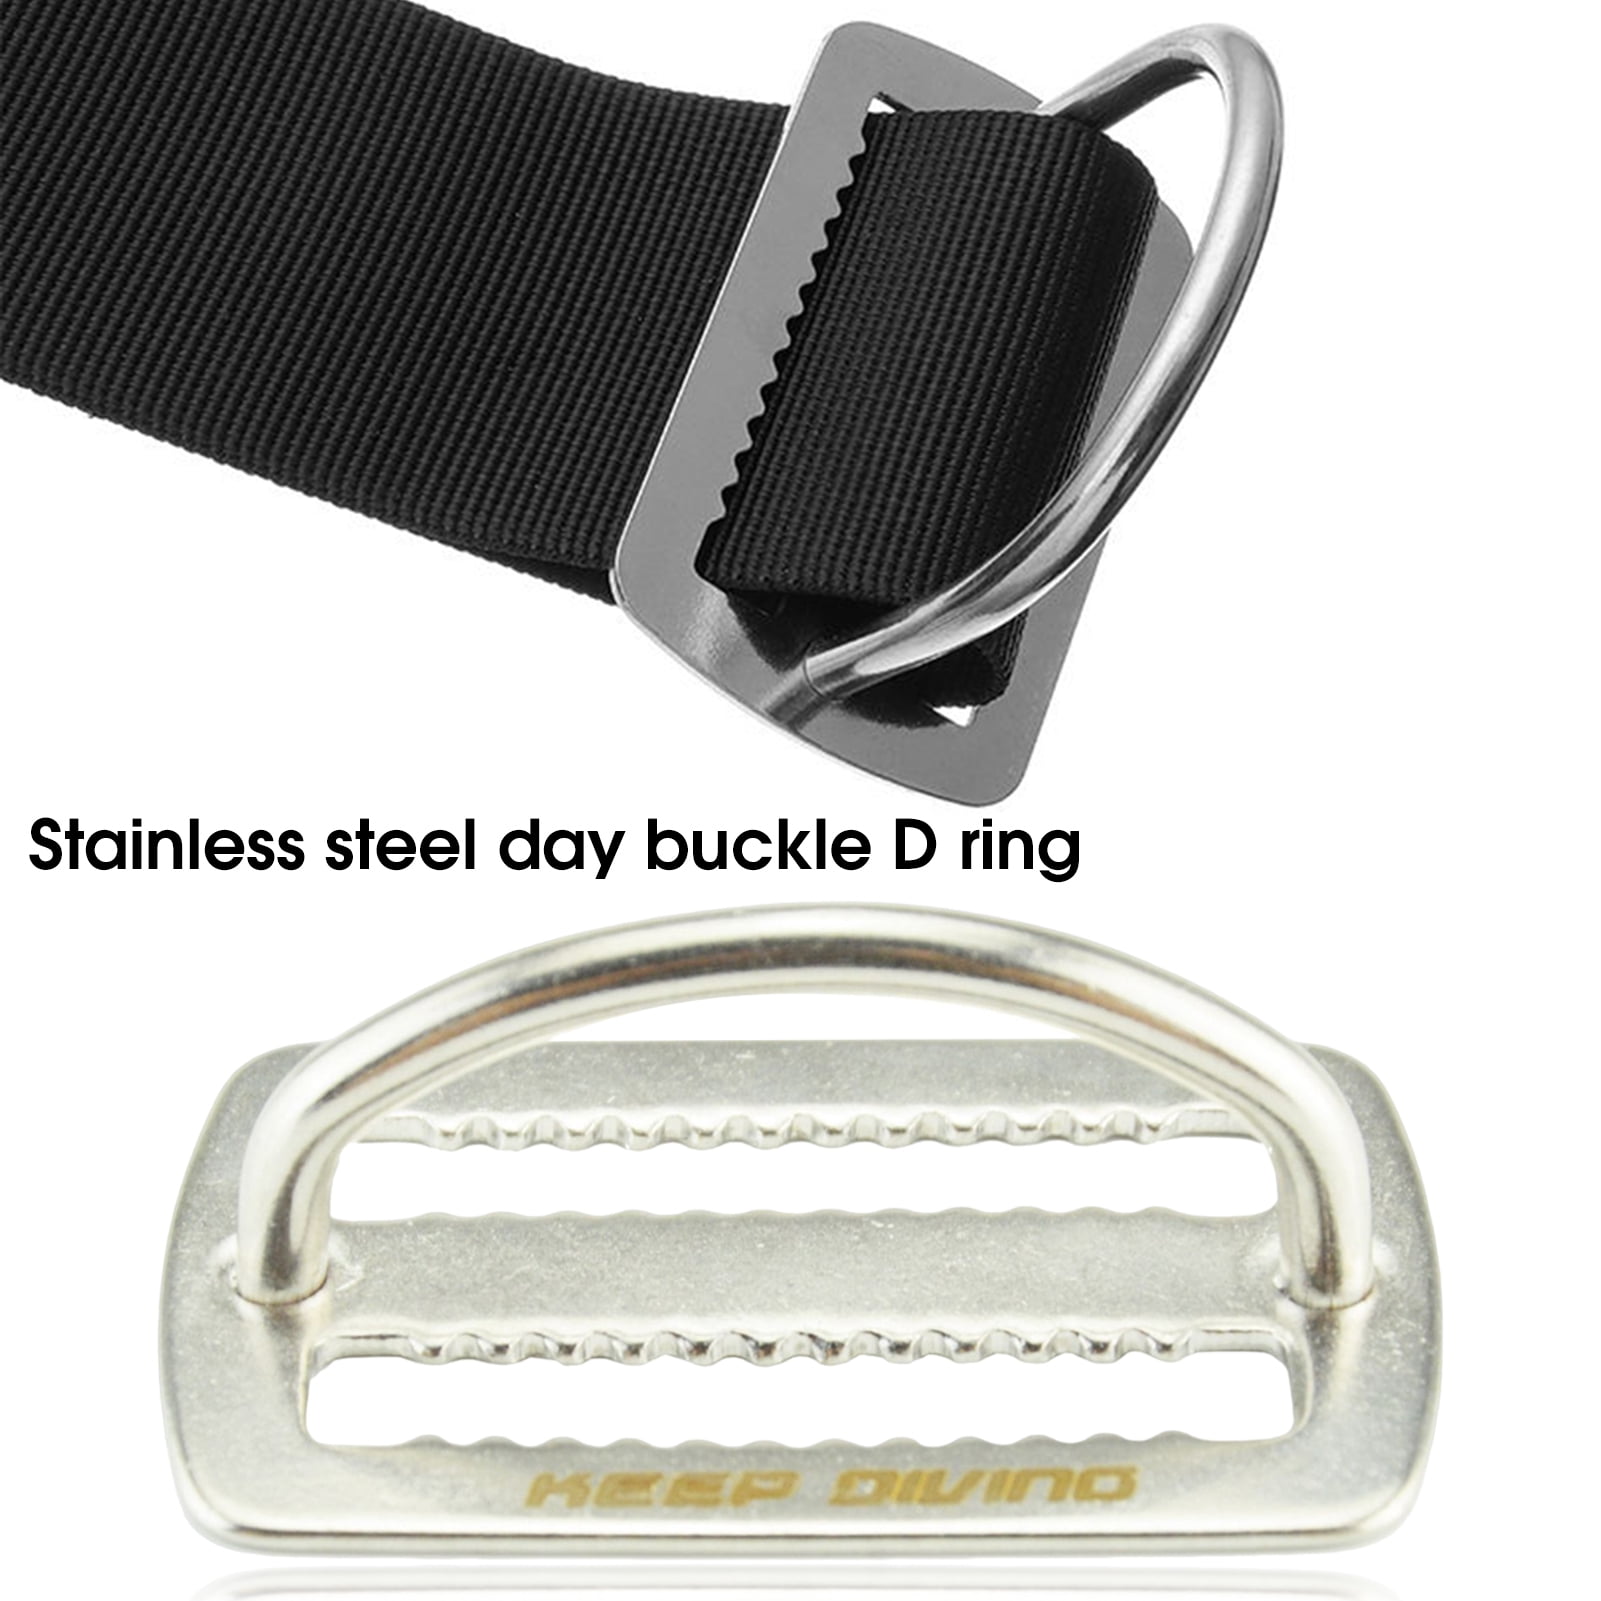 TYPES OF BELT BUCKLES AND FASTENINGS